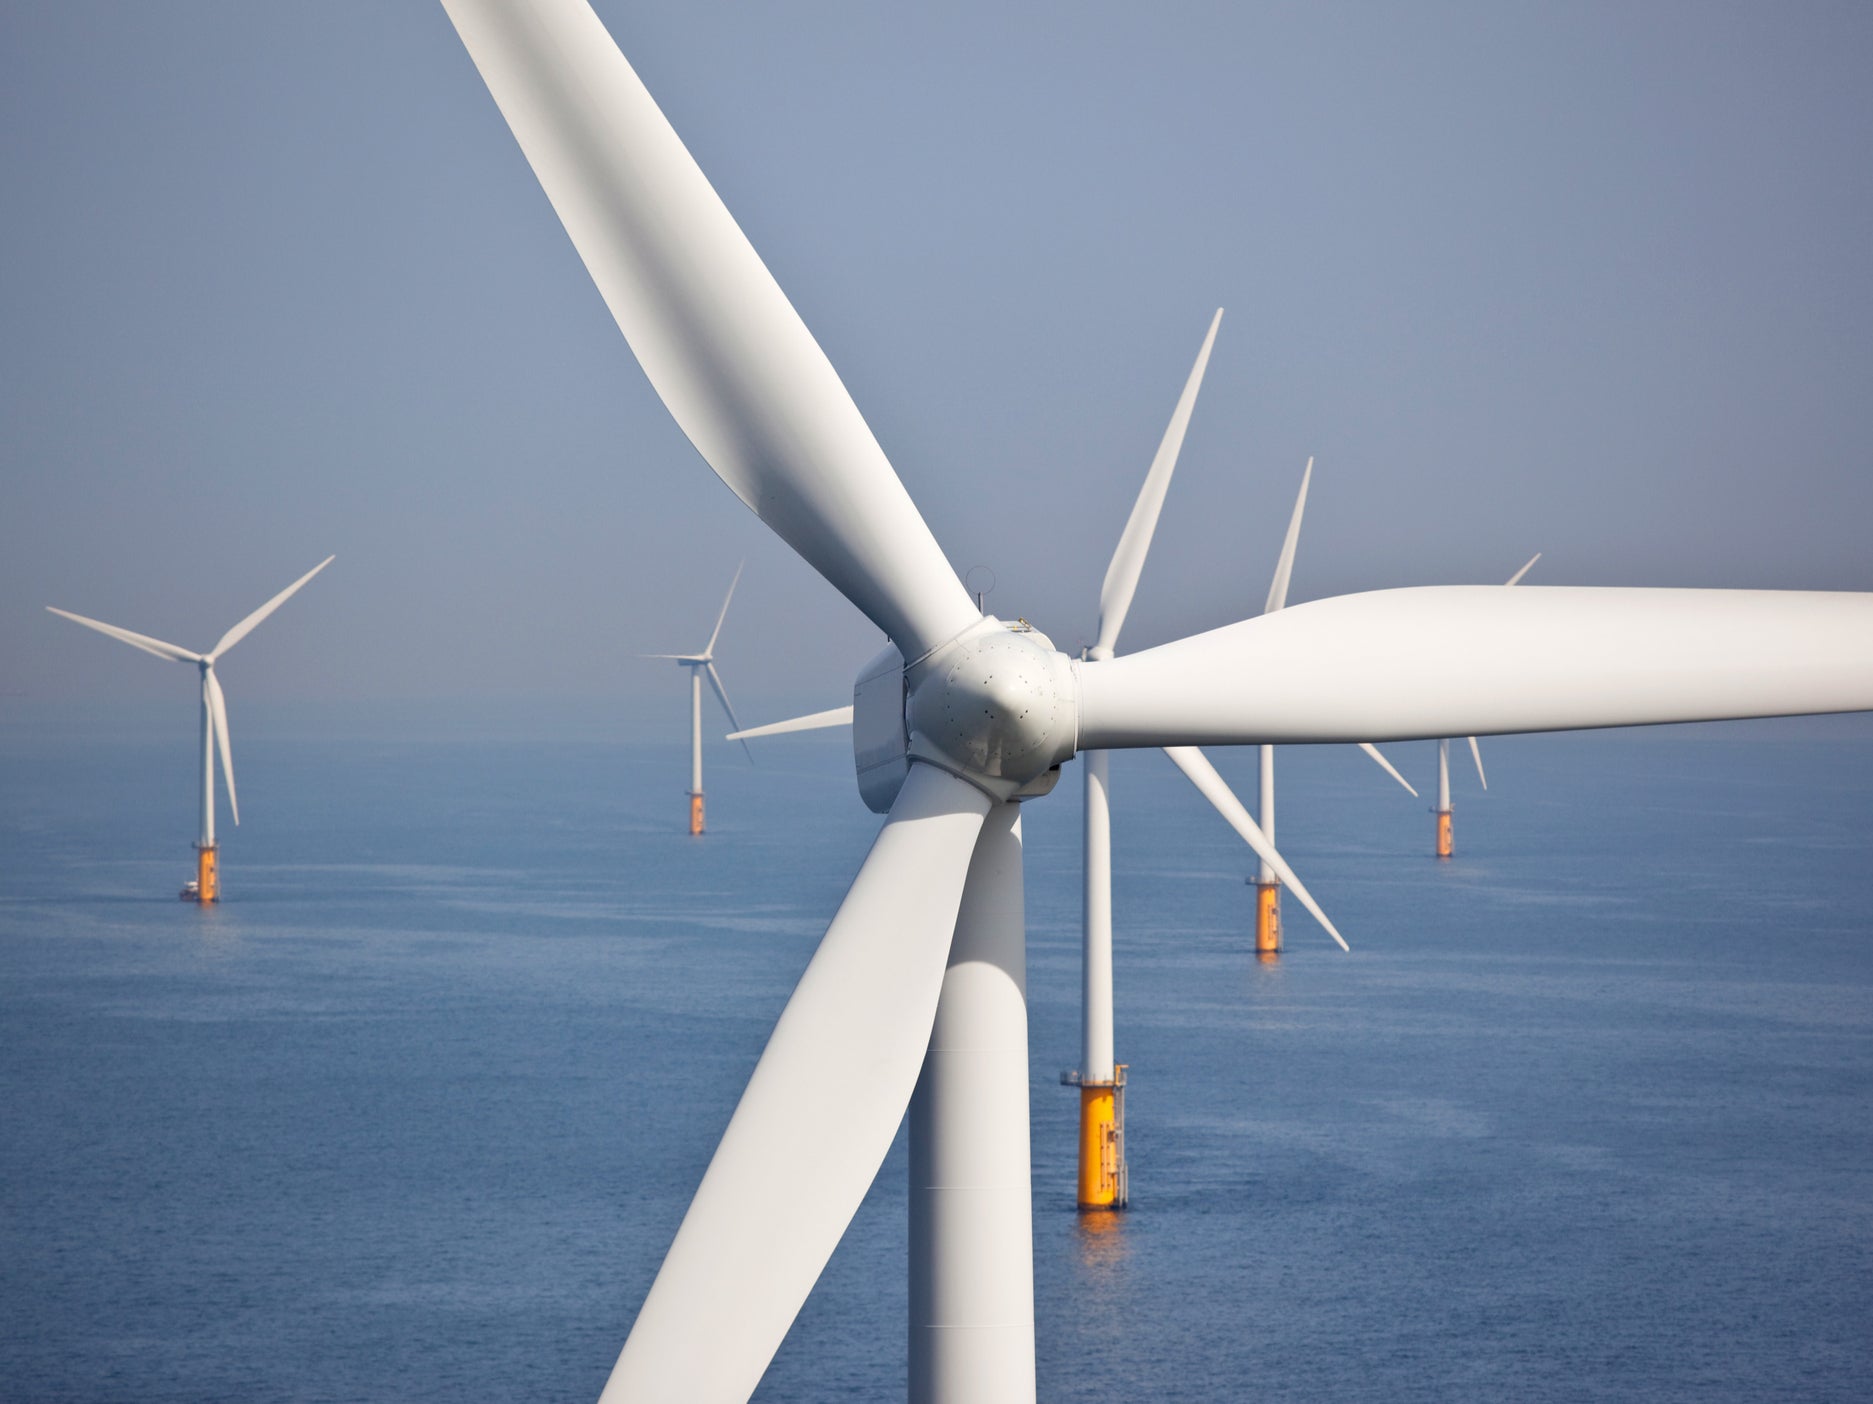 The new wind farm will be around 43 miles off the coast